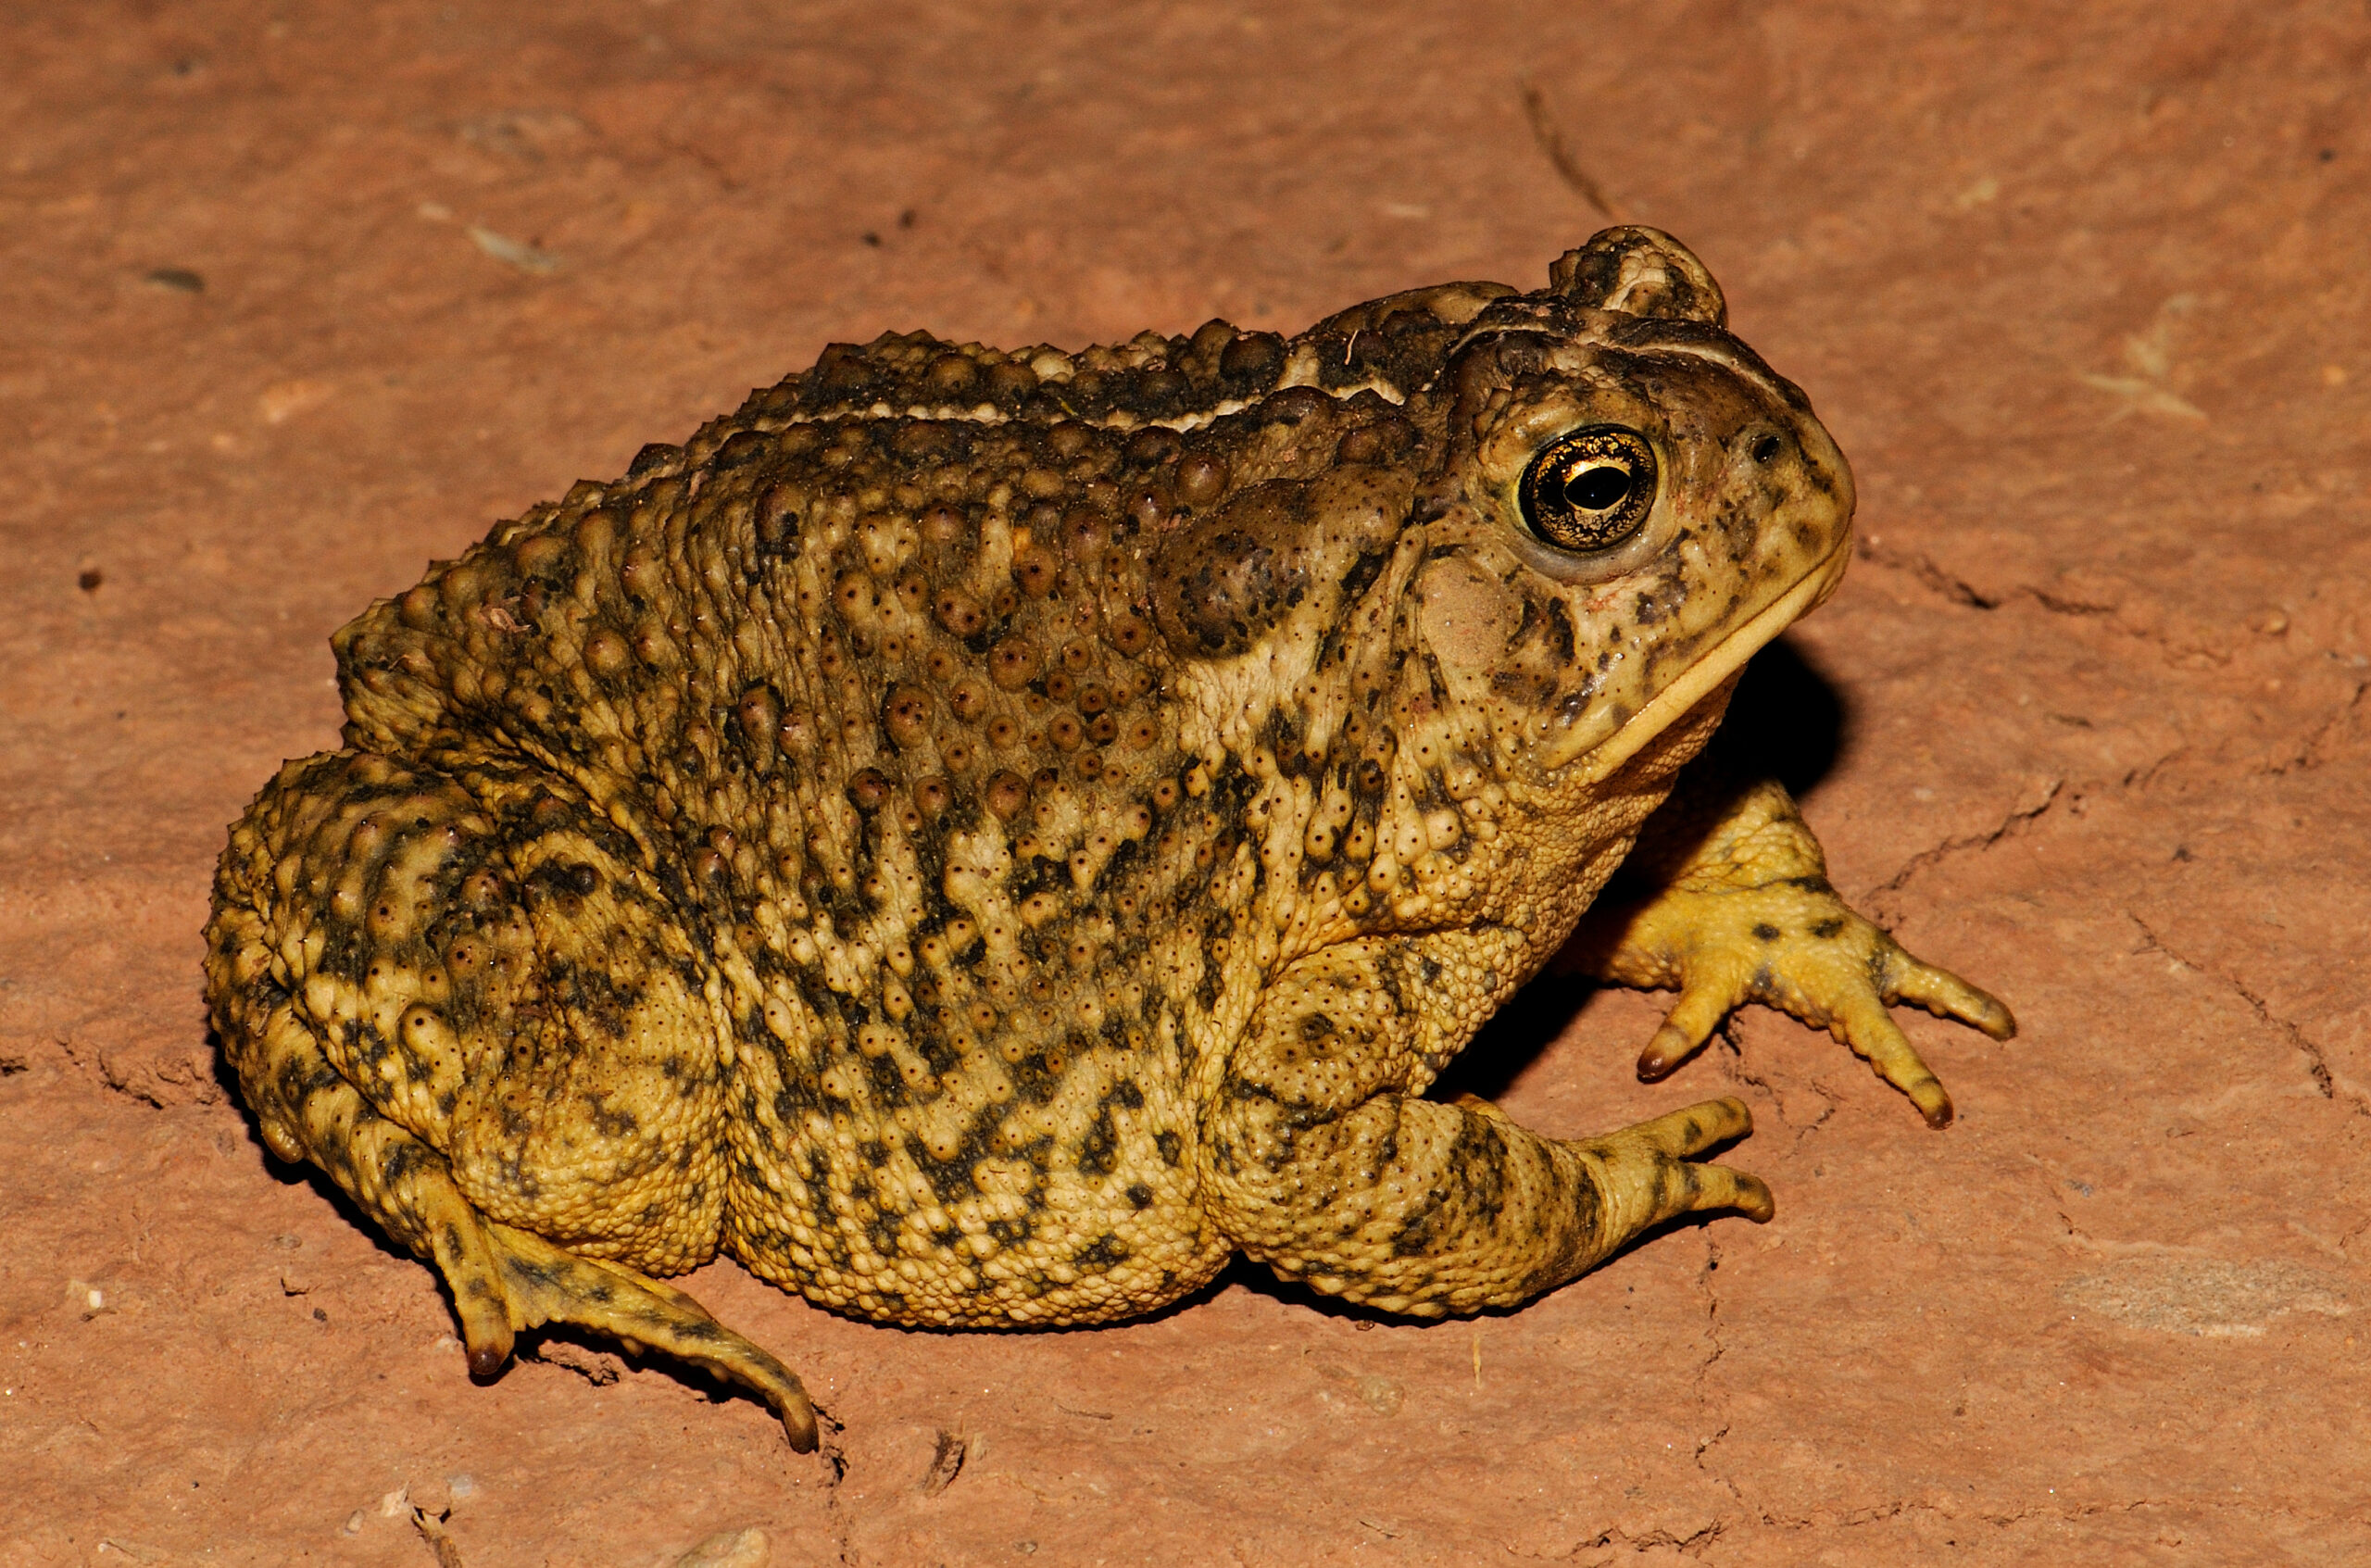 <i/>Woodhouse's Toad</i><br>
<small> By: Rick Fridell</small>
